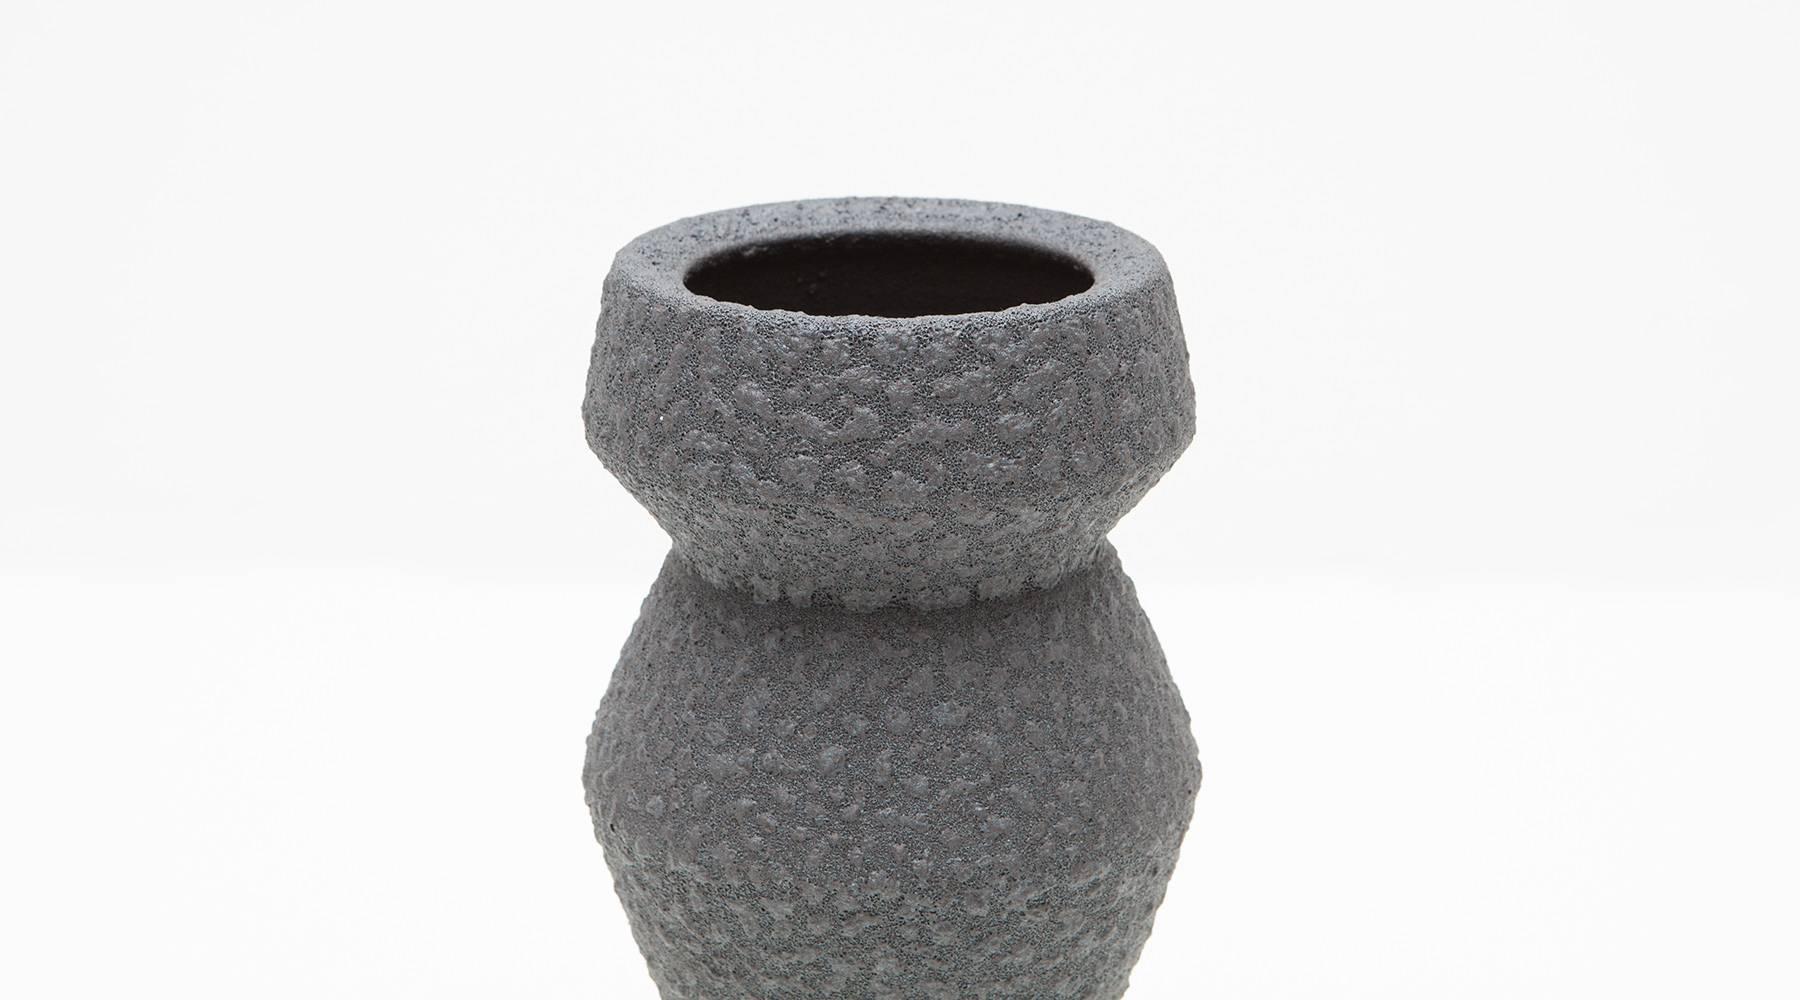 Nicely shaped, monochrome vase designed and produced by German artist Martin Schlotz. Martin Schlotz works in thematic series. In variations of a certain type of shape. Available as a single object or in a set of three.